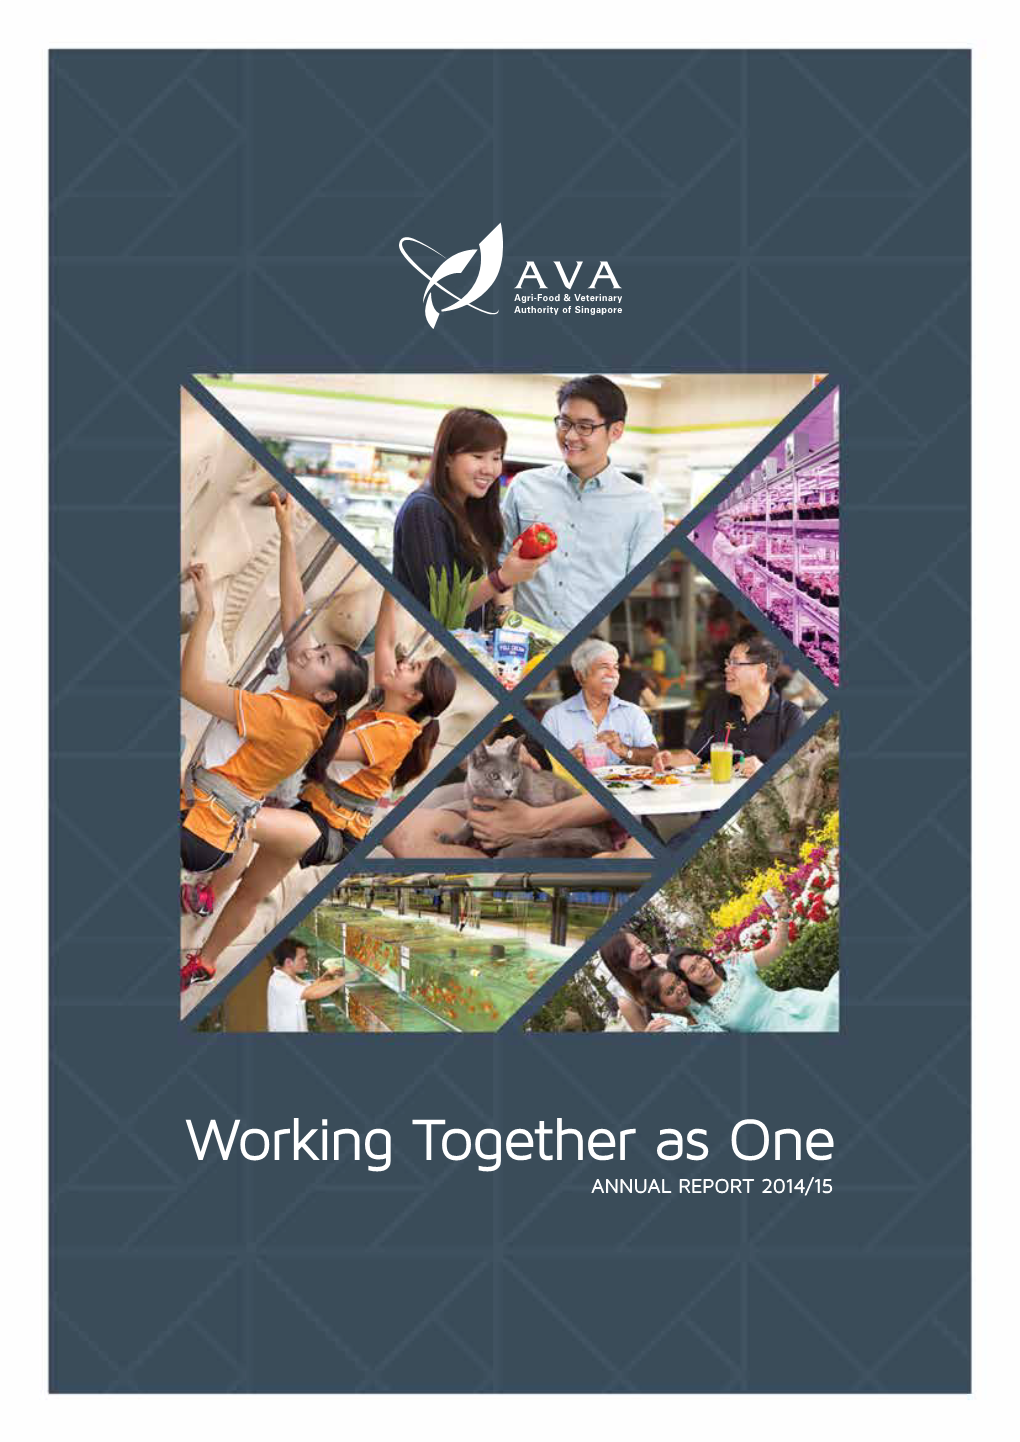 Working Together As One ANNUAL REPORT 2014/15 VISION AWARDS & ACCOLADES